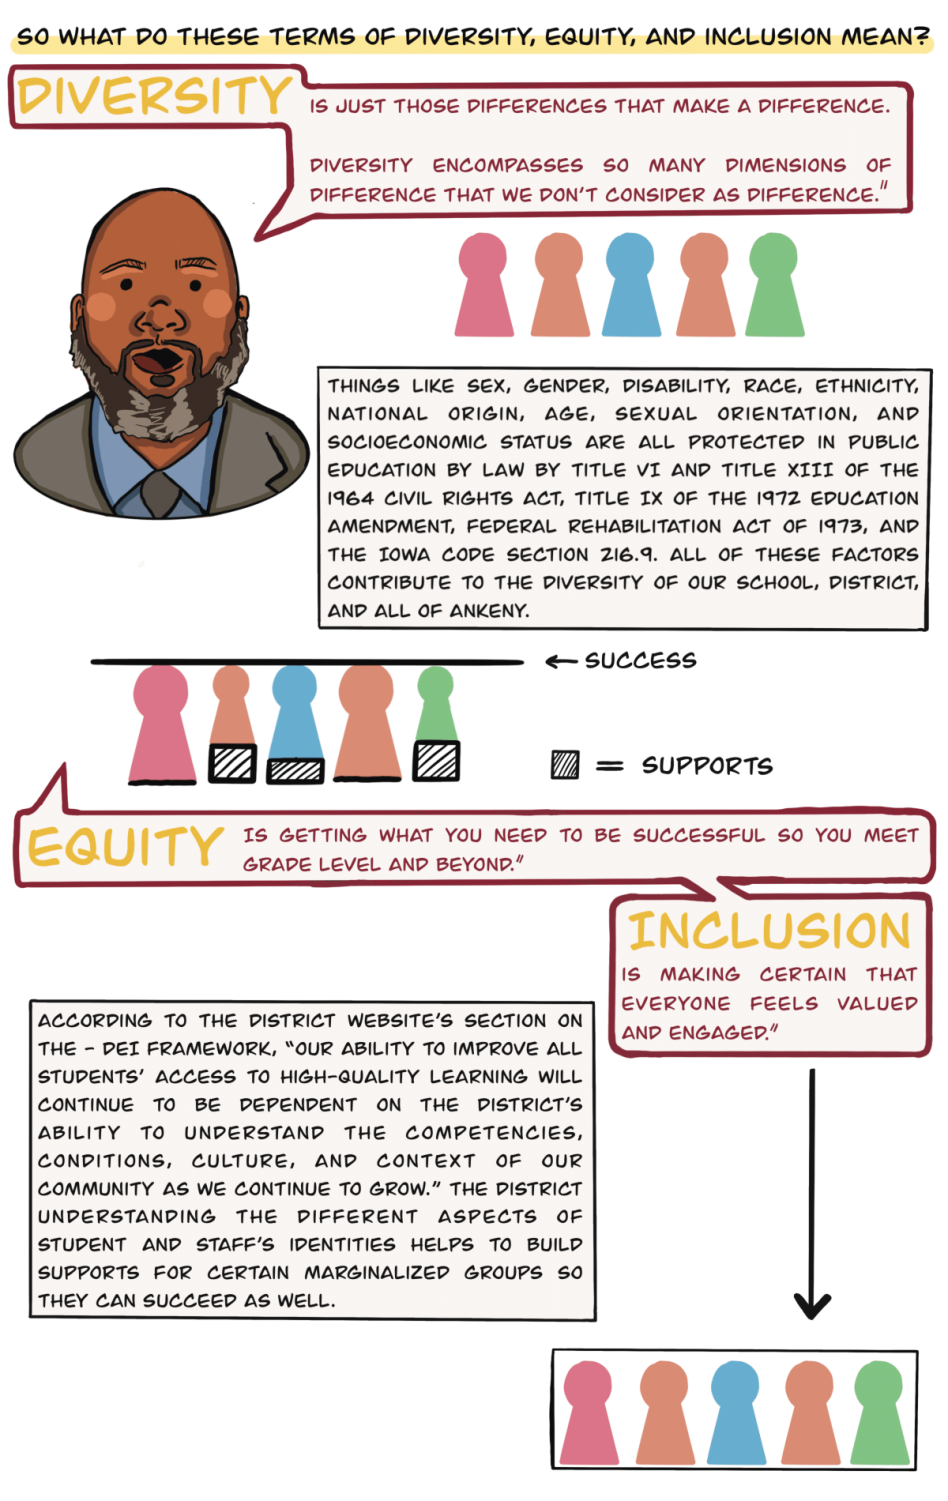 “So what do these terms of diversity, equity, and inclusion mean?” Ken Morris Jr: “Diversity is just those differences that make a difference. Diversity encompasses so many dimensions of difference that we don't consider as difference. Equity is getting what you need to be successful so you meet grade level and beyond. Inclusion is making certain that everyone feels valued and engaged." Things like sex, gender, disability, race, ethnicity, national origin, age, sexual orientation, and socioeconomic status are all protected in public education by law by Title VI and title XIII of the 1964 Civil Rights Act, Title IX of the 1972 Education Amendment, Federal Rehabilitation Act of 1973, and the Iowa Code section 216.9. All of these factors contribute to the diversity of our school, district, and all of Ankeny. According to the district website's section on the DEI Framework, “our ability to improve all students' access to high-quality learning will continue to be dependent on the district's ability to understand the competencies, conditions, culture, and context of our community as we continue to grow.” The district understanding the different aspects of student and staff's identities helps to build supports for certain marginalized groups so they can succeed as well. 